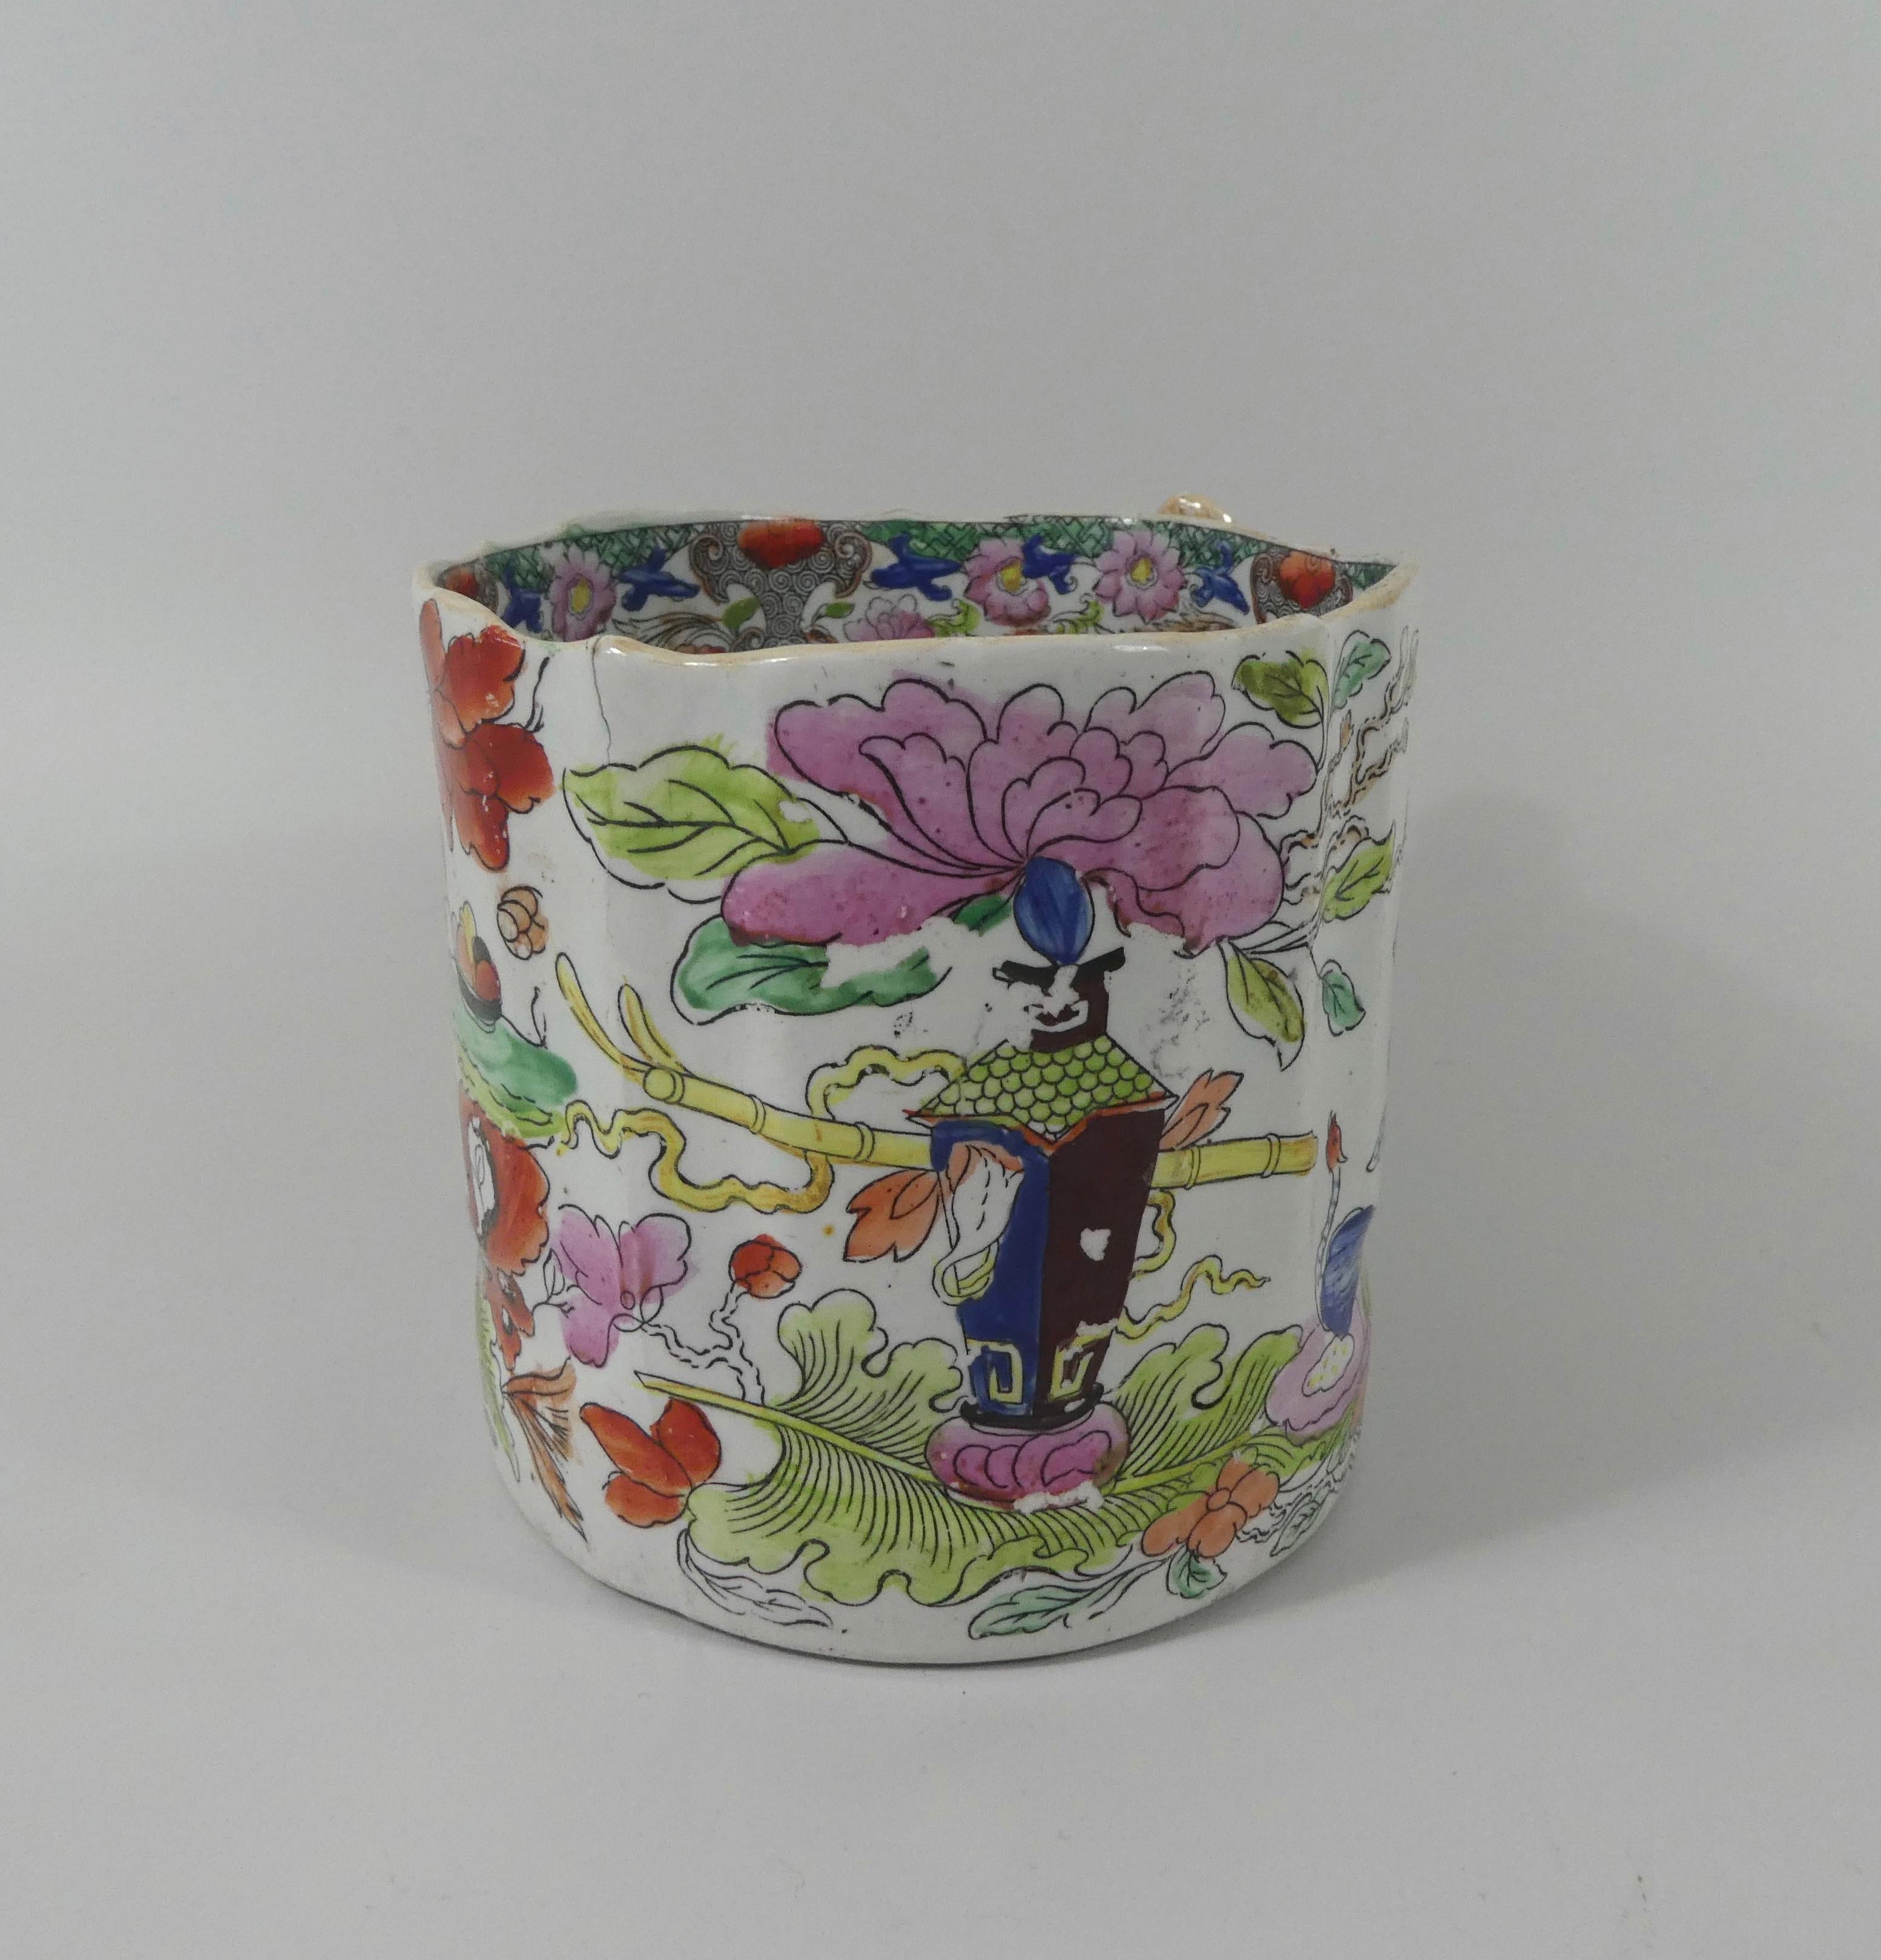 Masons Ironstone, a large cider mug, circa 1815. The over sized, moulded mug, printed and painted in the ‘Table and Vase’ pattern with a large vase, upon an artemisia leaf, next to an exotic bird, beneath flowering plants. The interior with a band